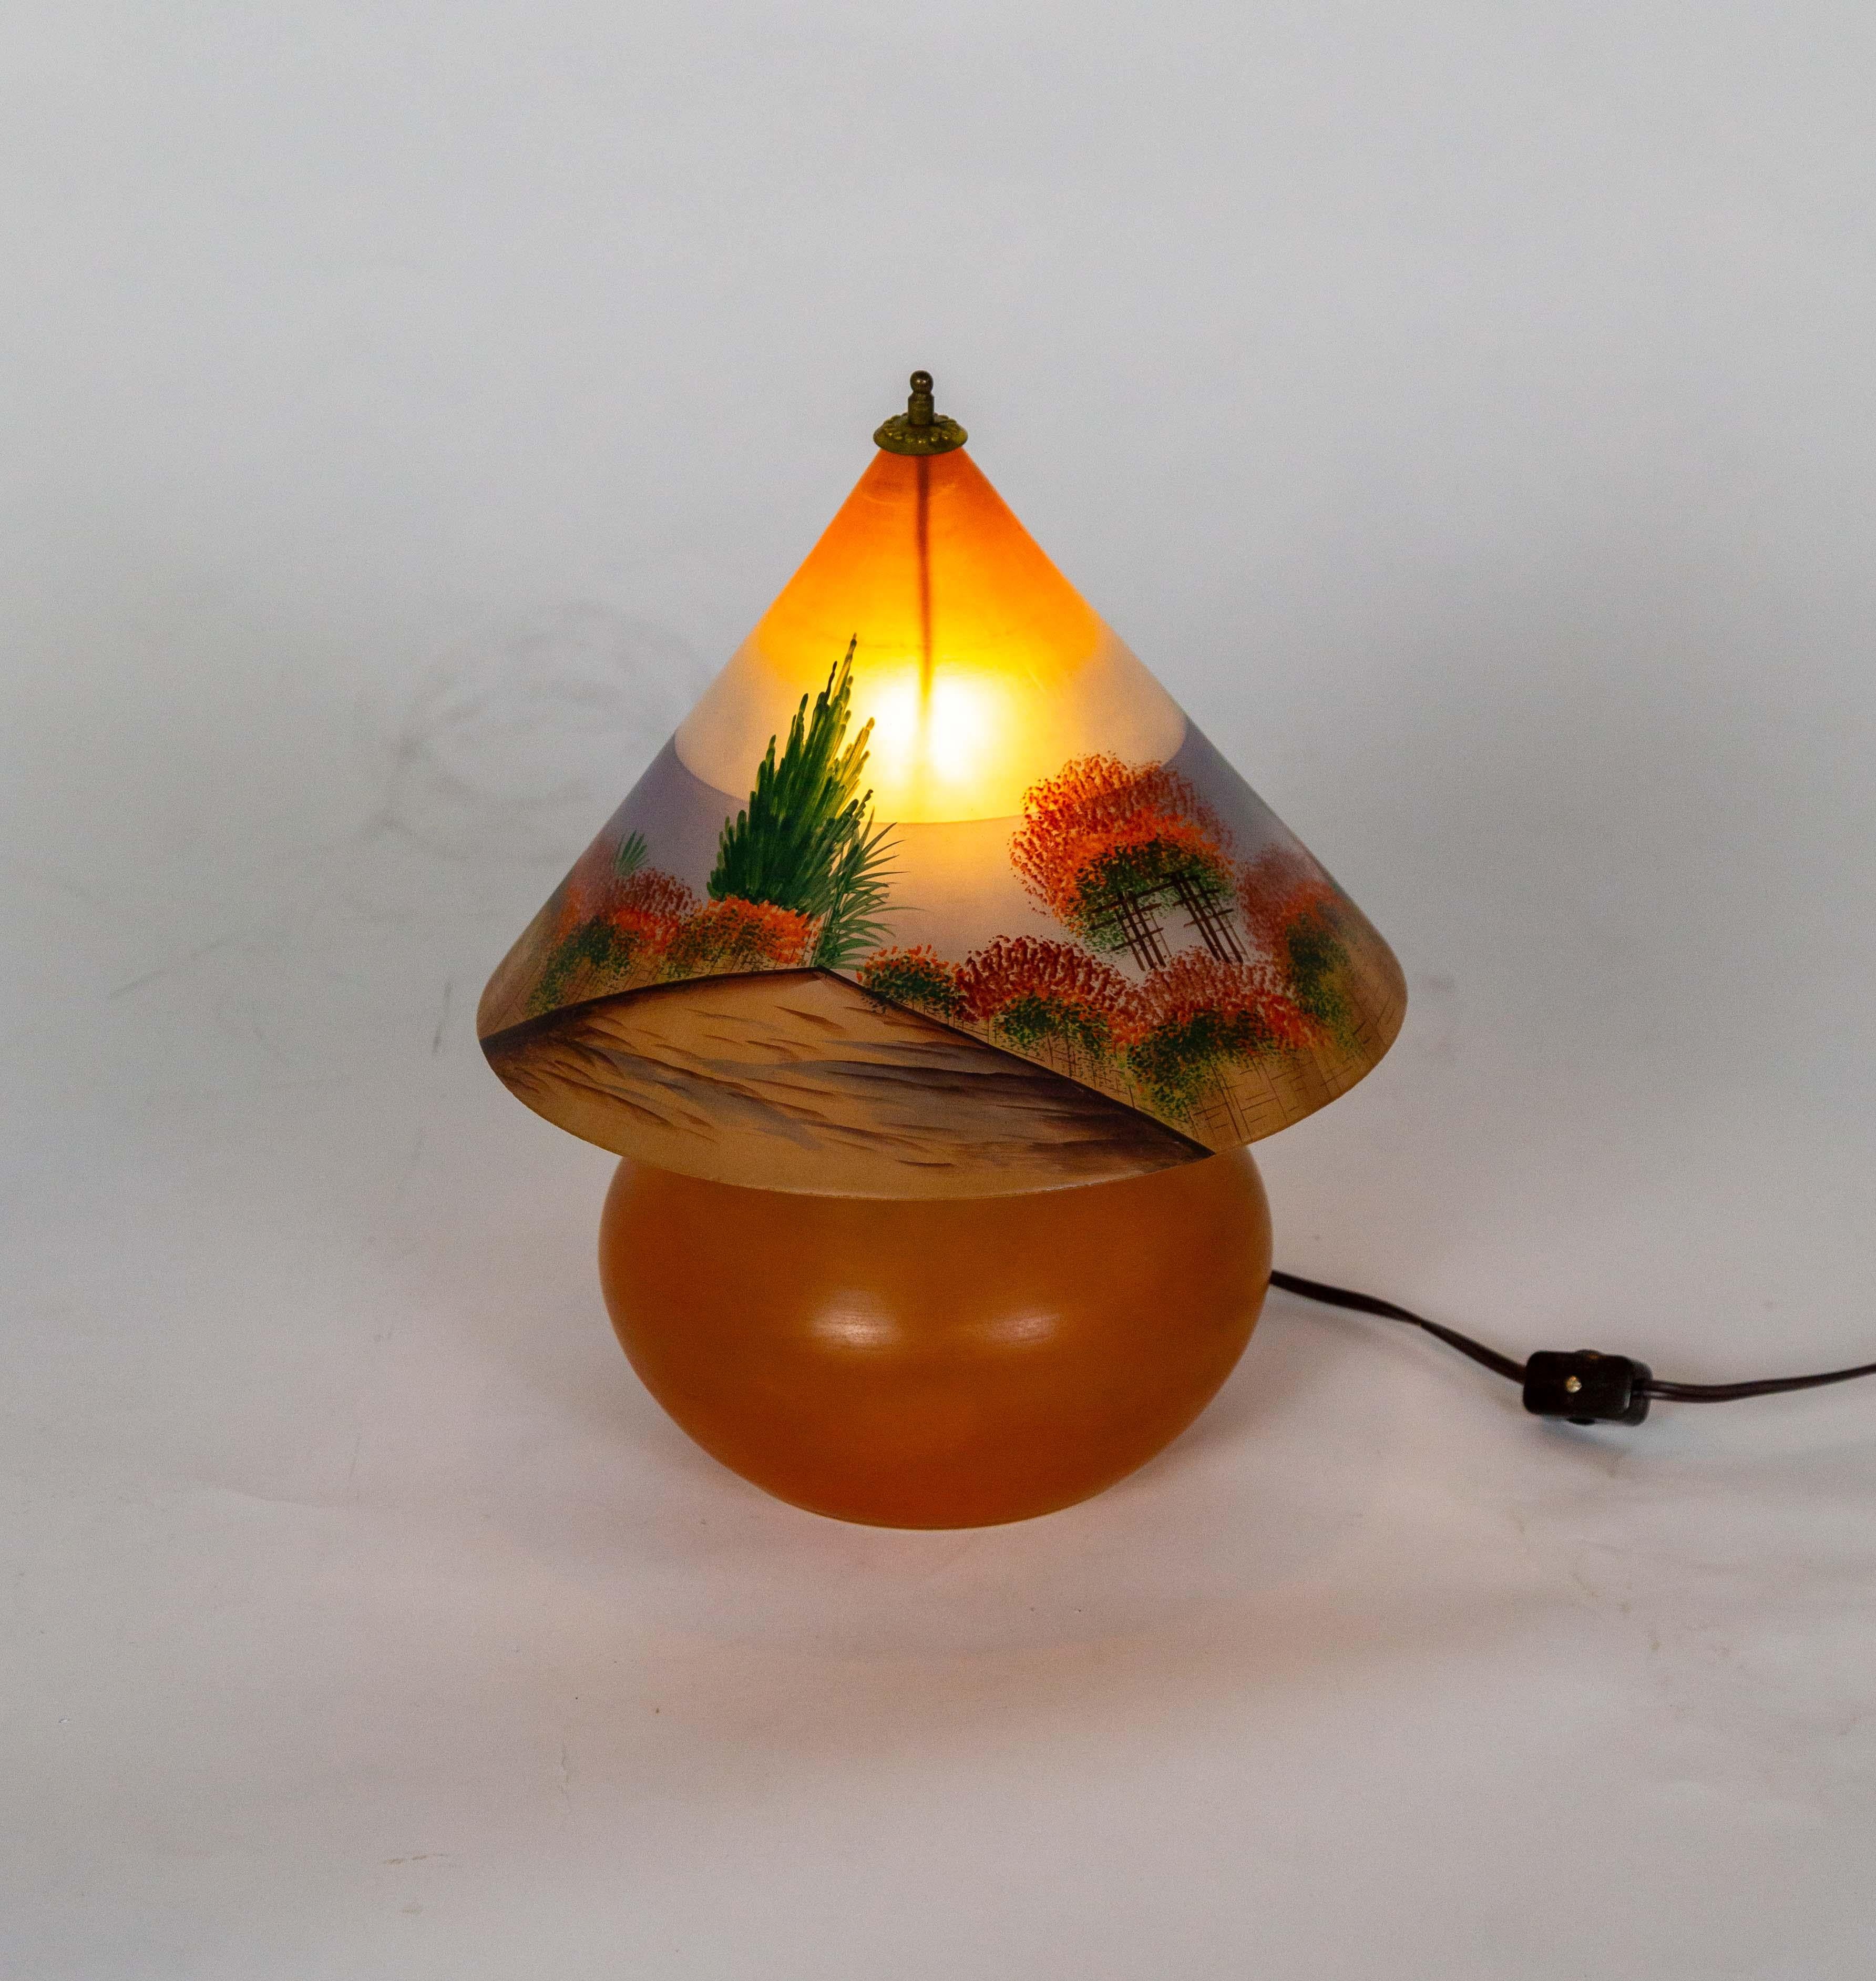 A hand-crafted Czechoslovakian glass table lamp with a spherical base and cone-shaped shade.  The shade has a hand-painted landscape in orange and blue with red and green foliage and, when illuminated, looks like a sunrise. The base of the lamp is a